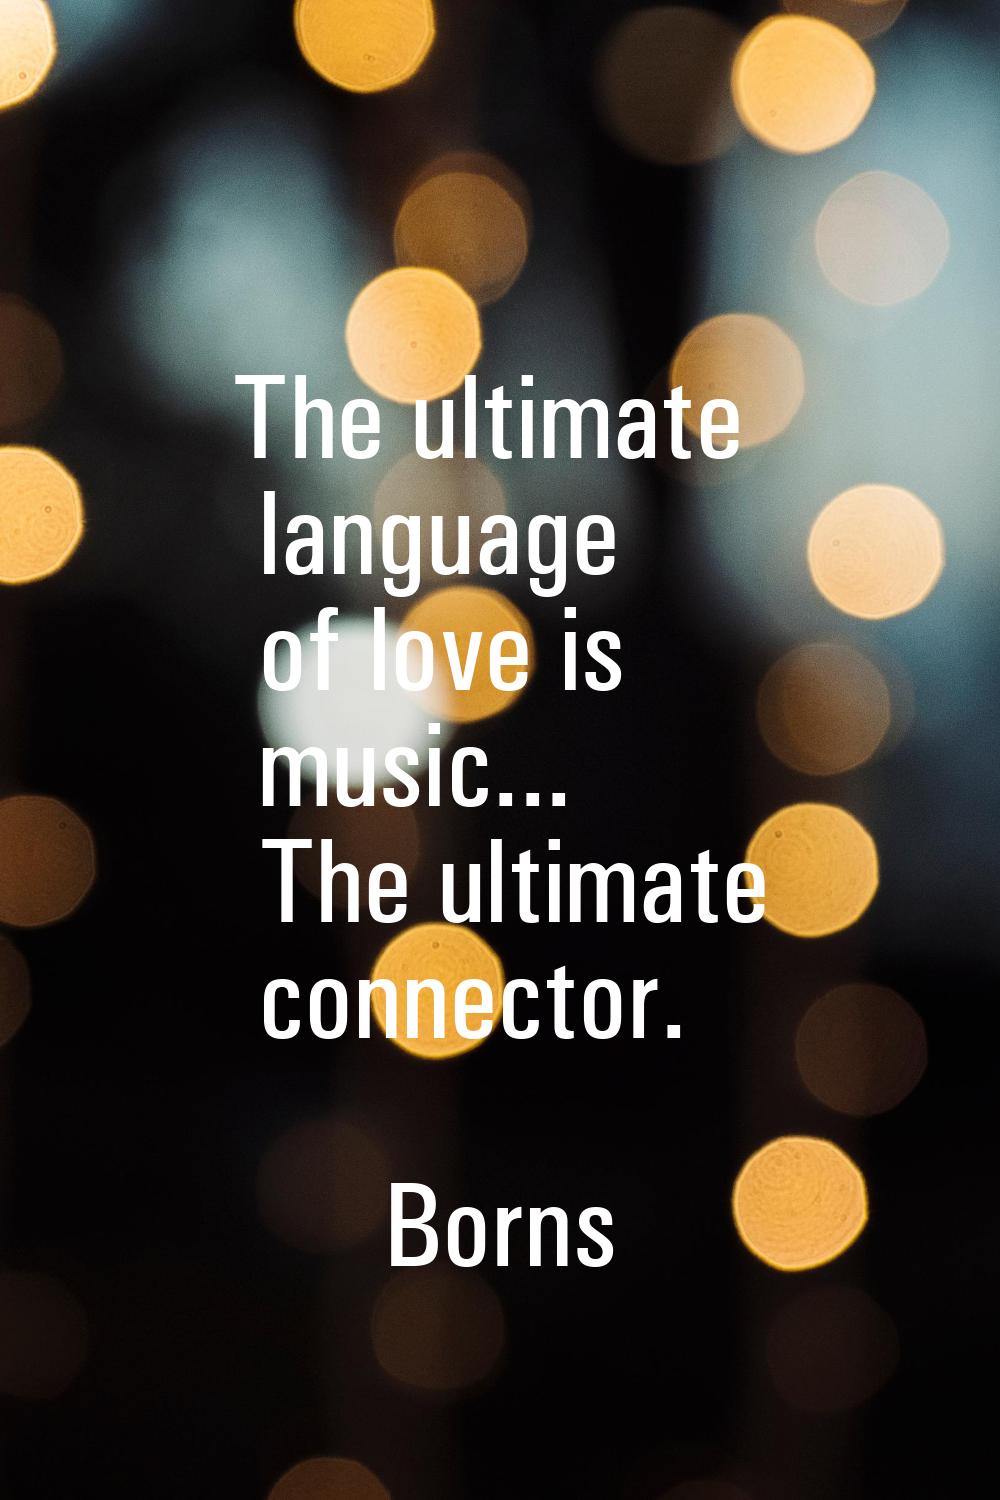 The ultimate language of love is music... The ultimate connector.